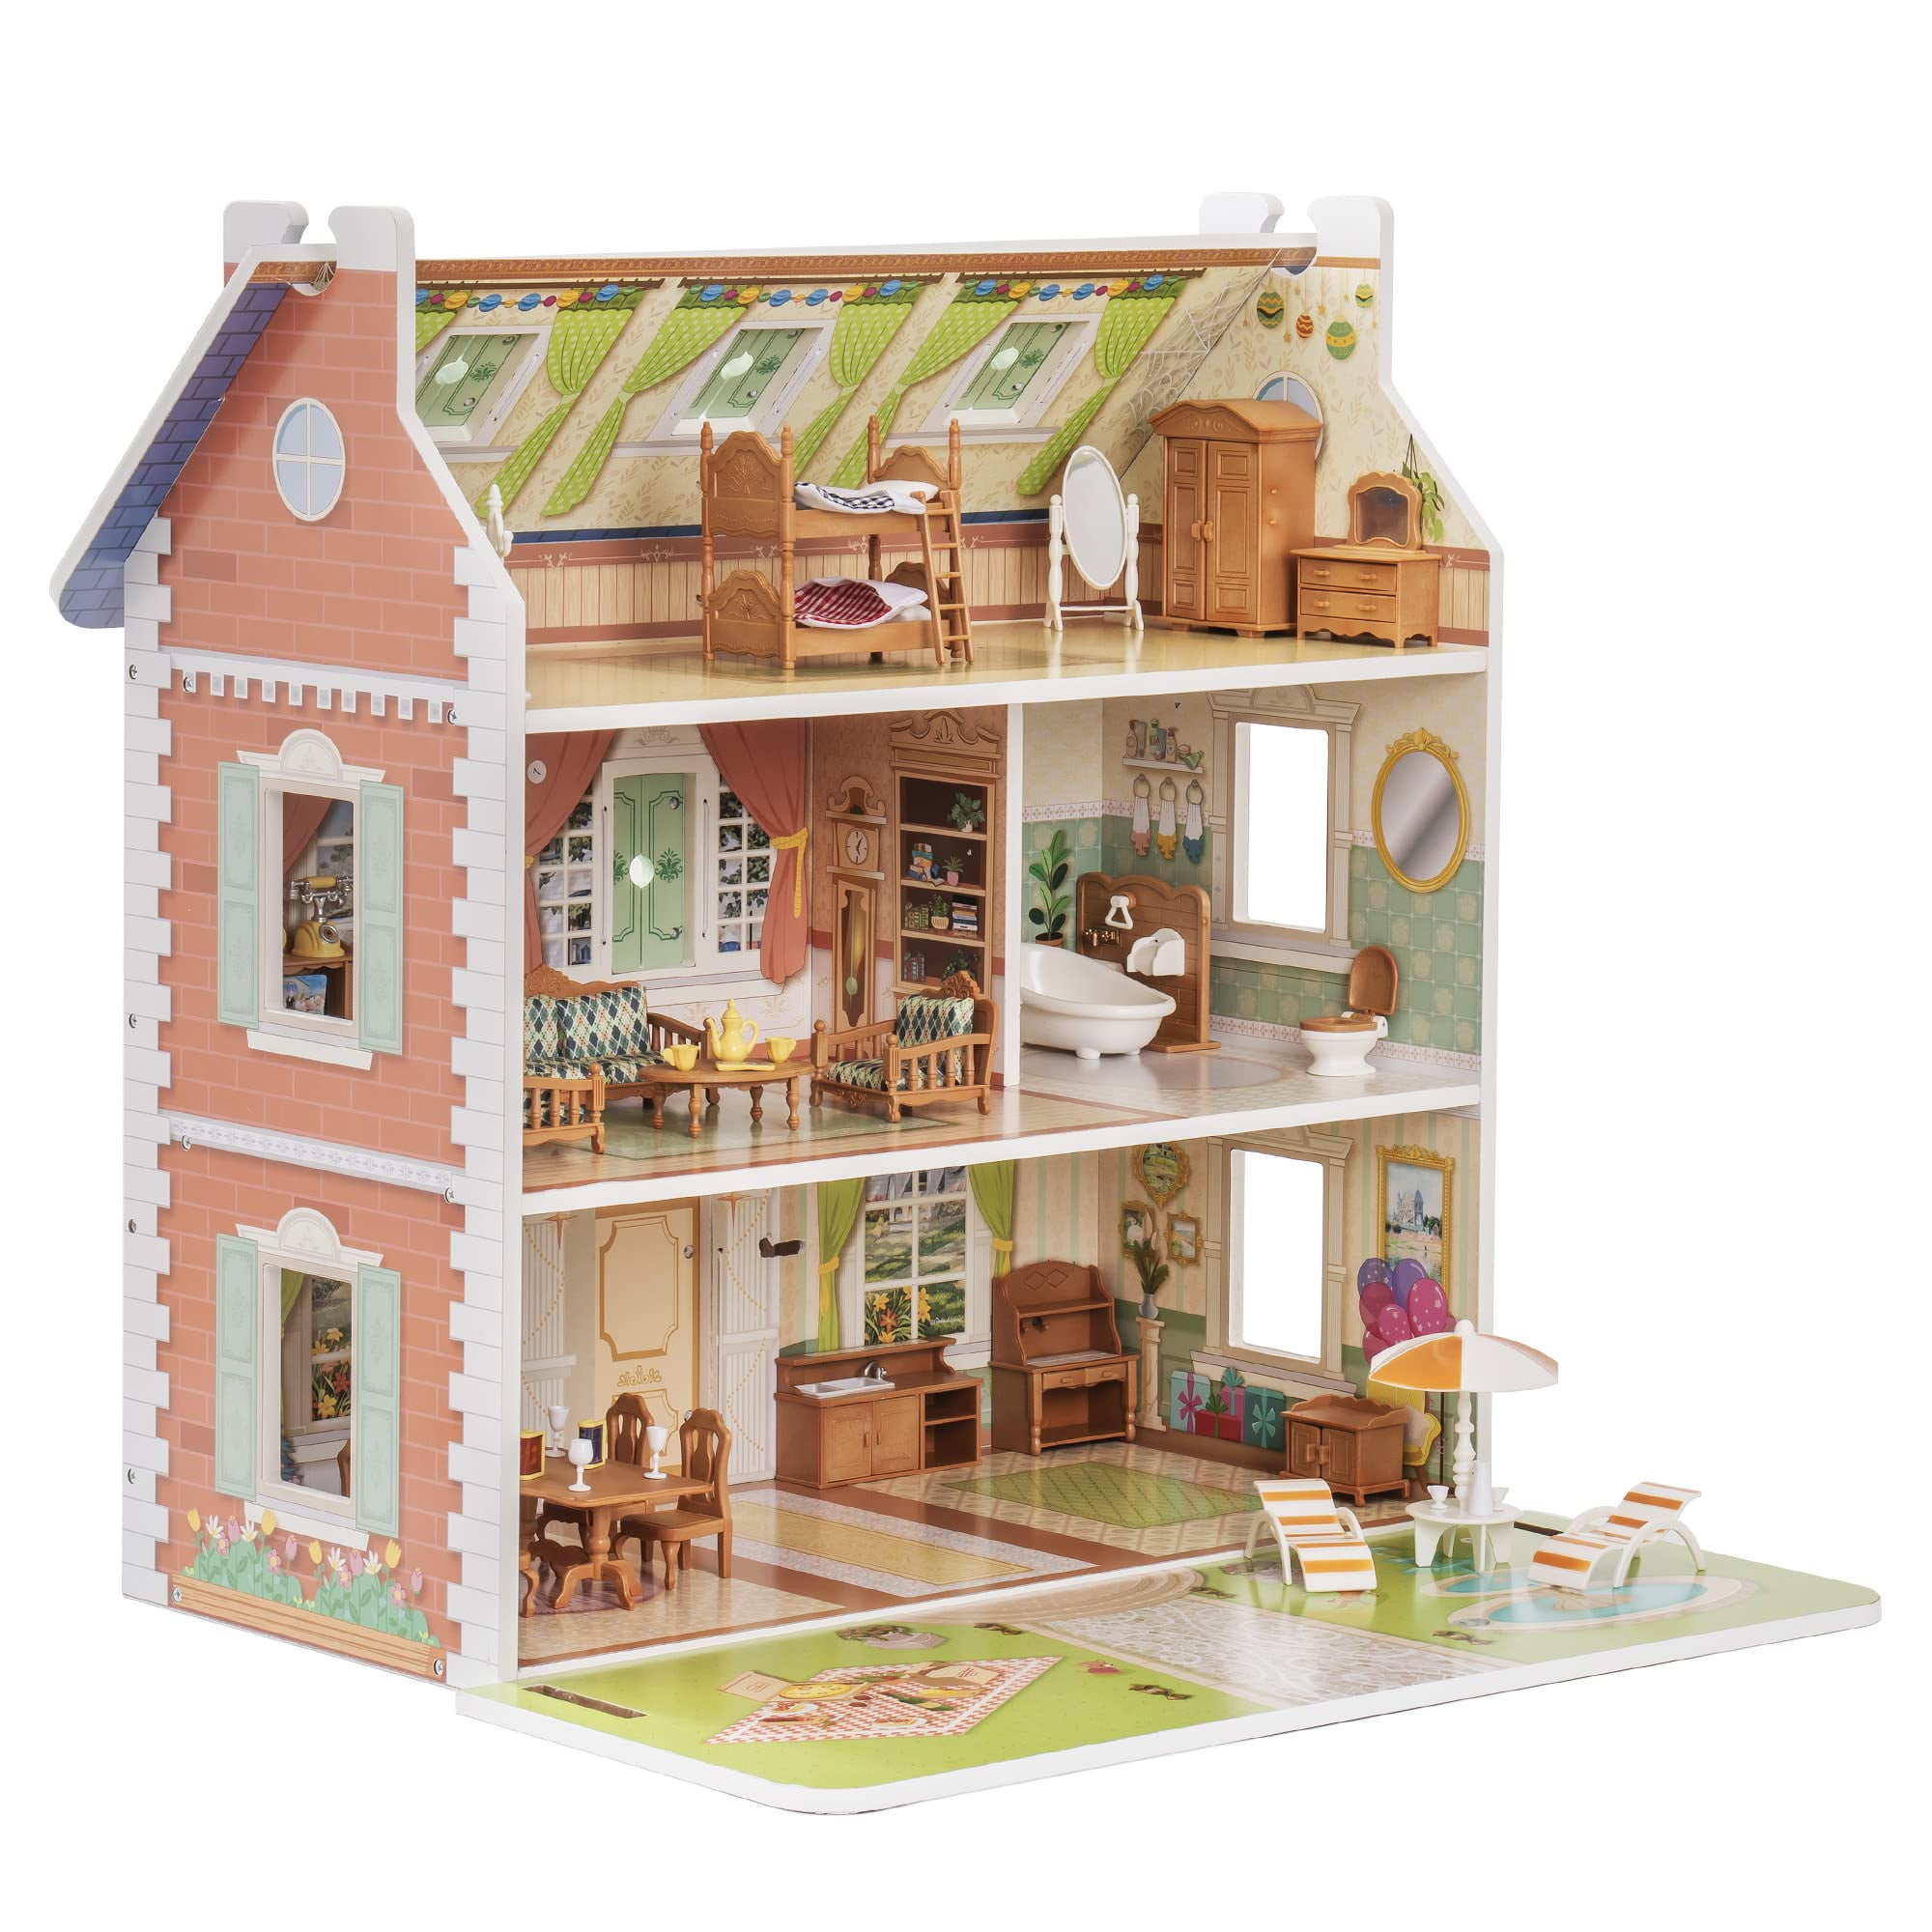 Robud Doll House 3 in 1 Wooden Dollhouse Dreamhouse for Kids Toddler  3+Years Old, Dollhouse with DIY Furniture 40+PCS Accessories,Present Gift  for